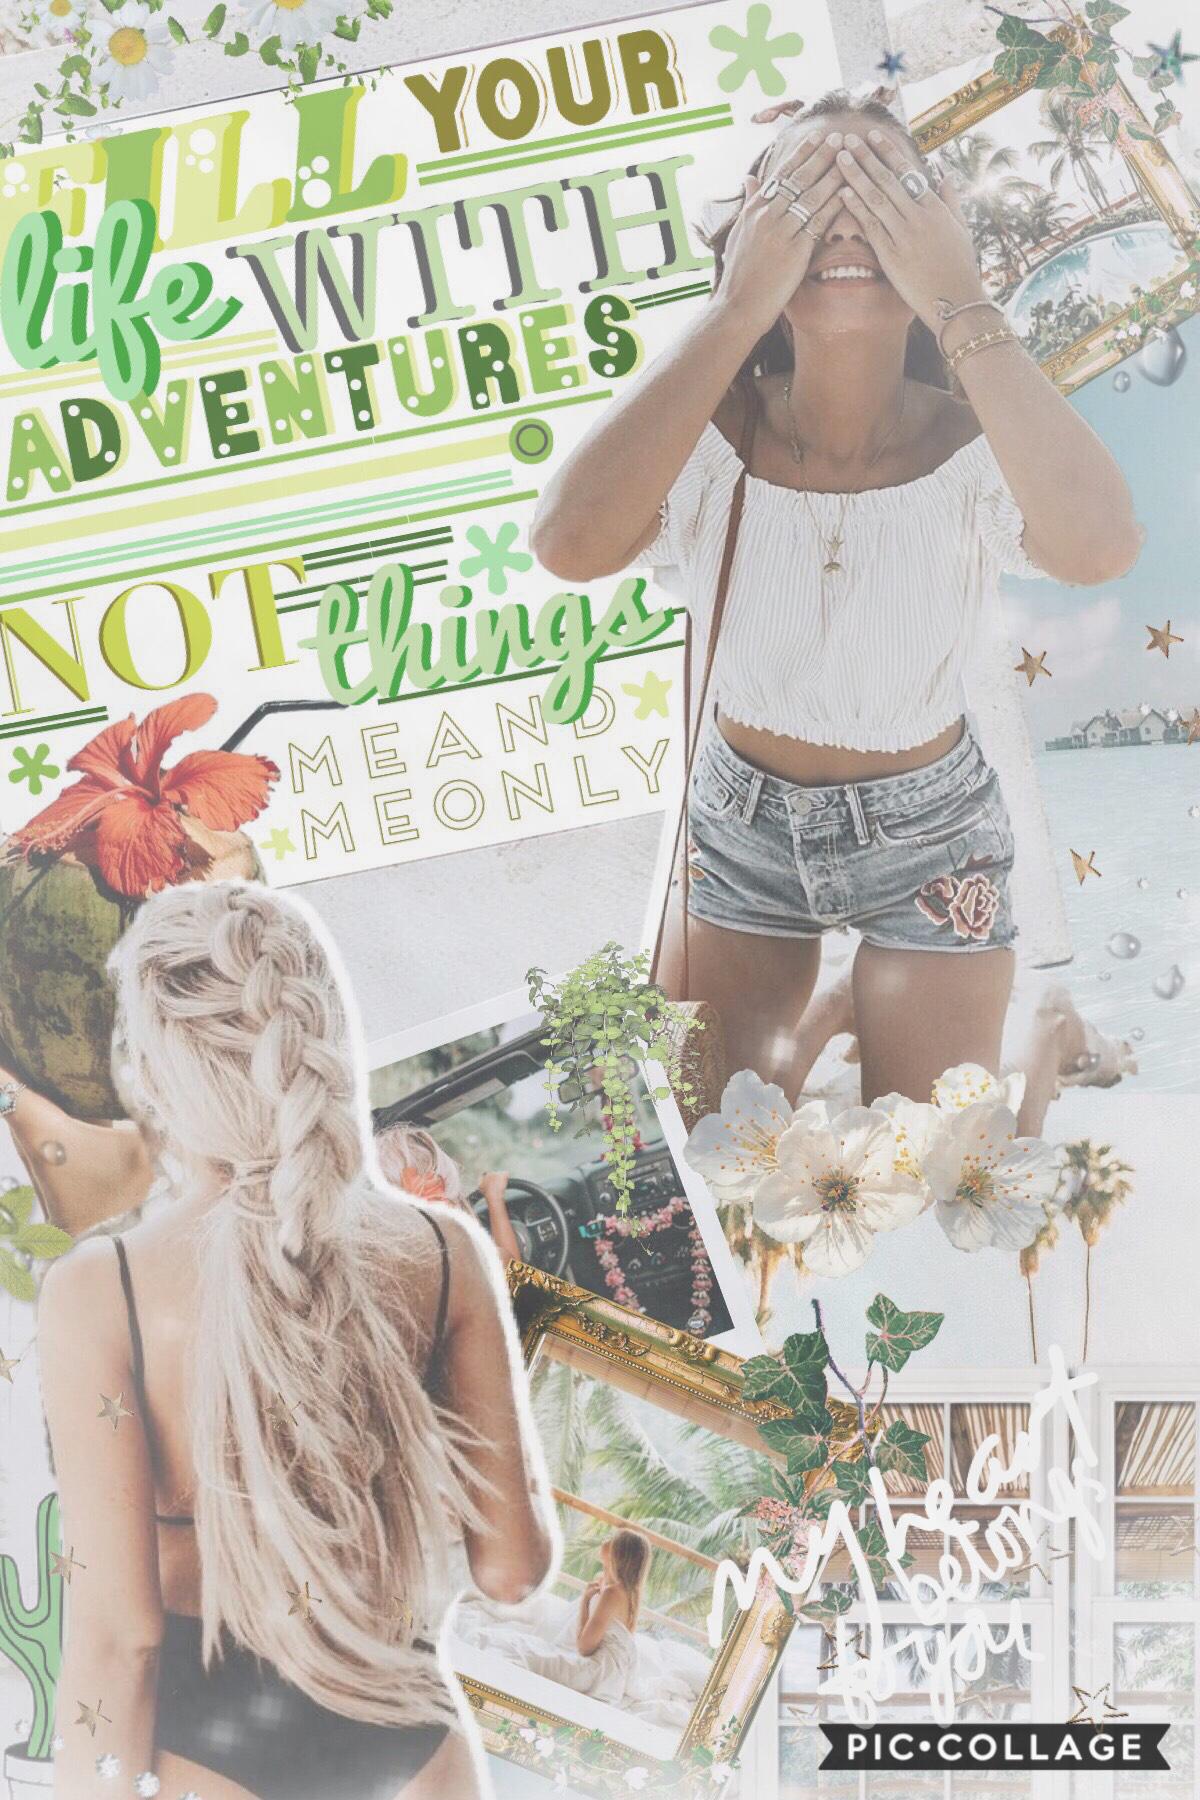 entry to a games🌿🍃sorry this is my old style but next collage will be my new style🍊😝get pumpeddd haha this new pc update is kinda cool and different🦋🌸 QOTD: summer or winter?🍡❄️